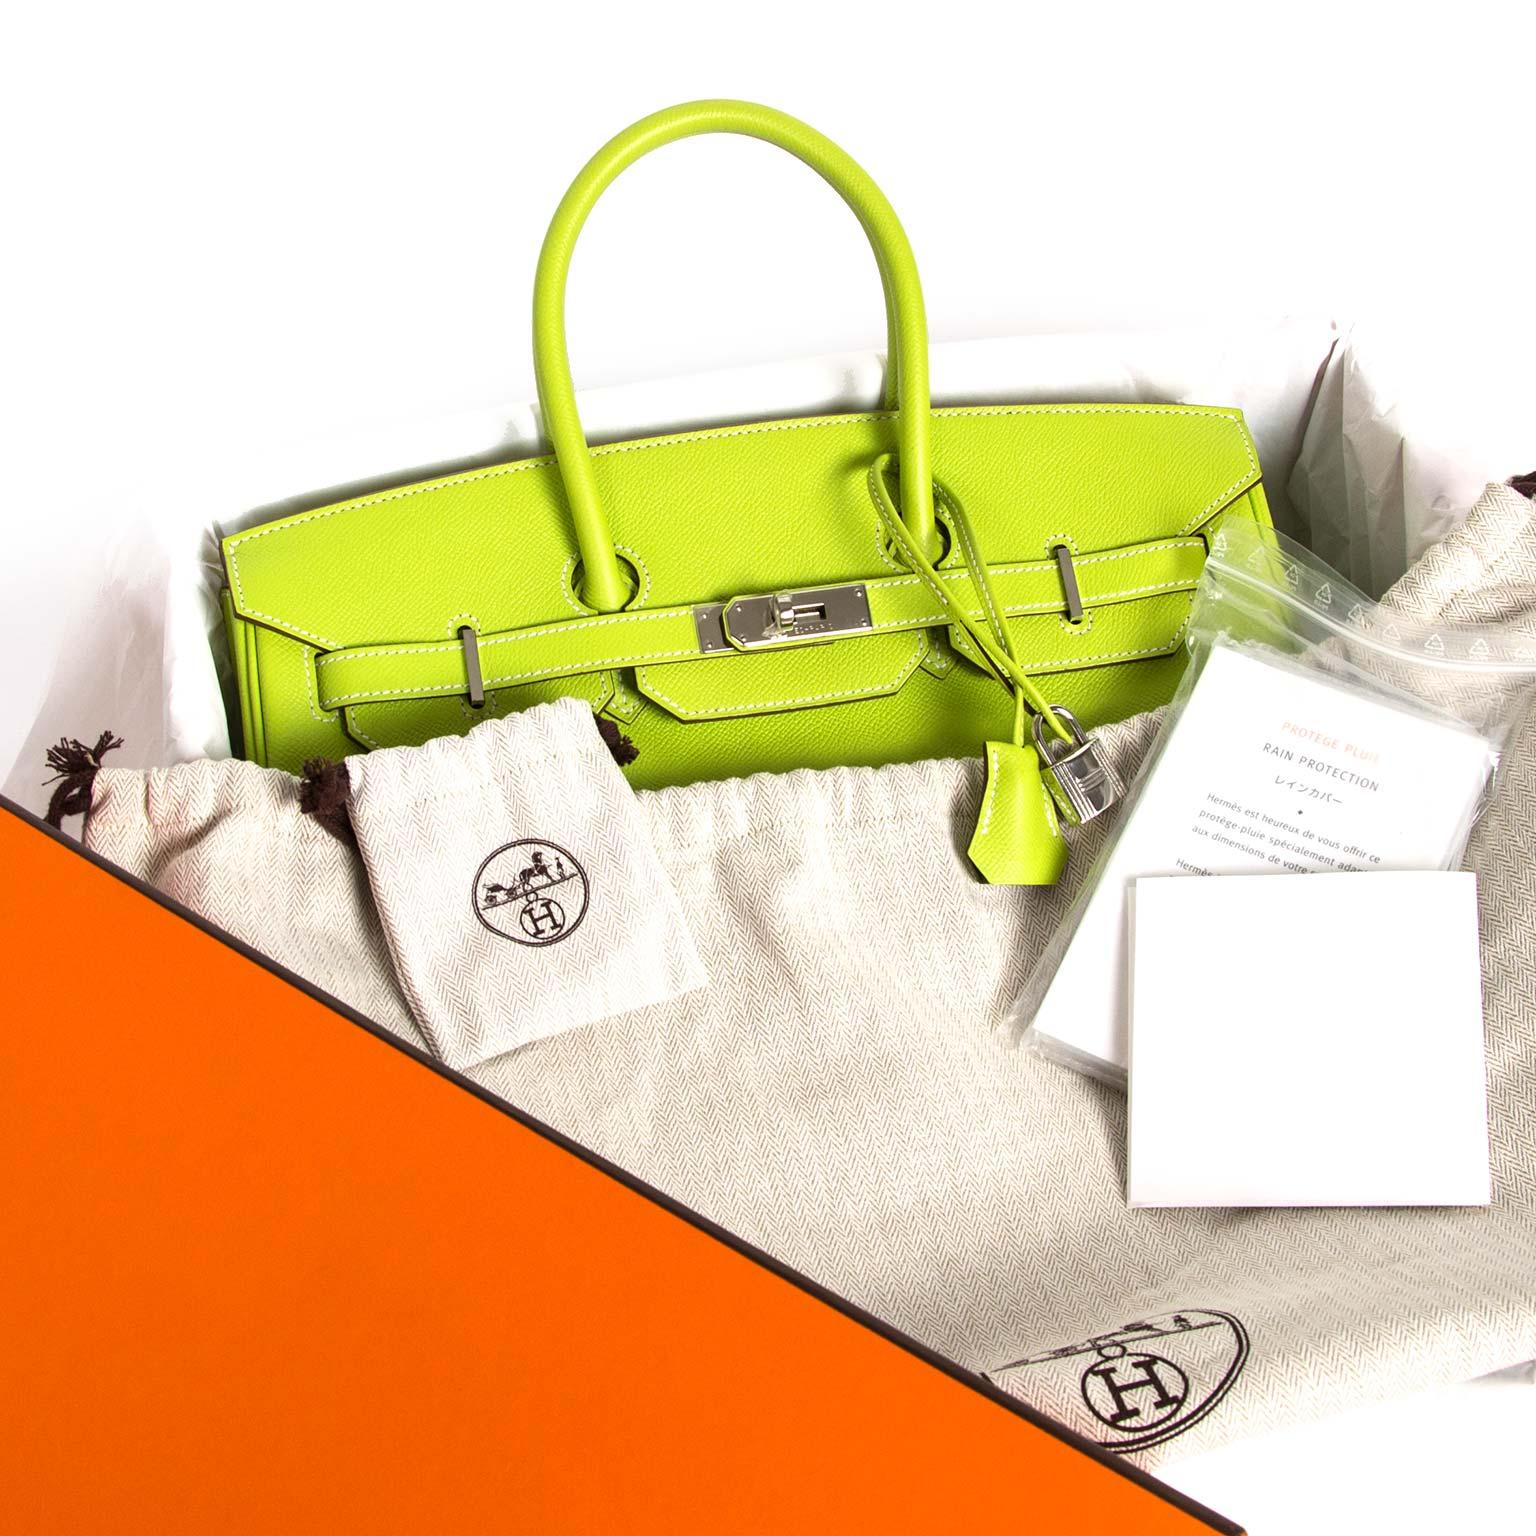 This Hermès Birkin 35 from the very exclusive and highly sought-after Candy Collection (2011) comes in a vibrant bright lime color, known to Hermès lovers all over the world as 'Kiwi'. The interior is crafted from an olive green Epsom leather,